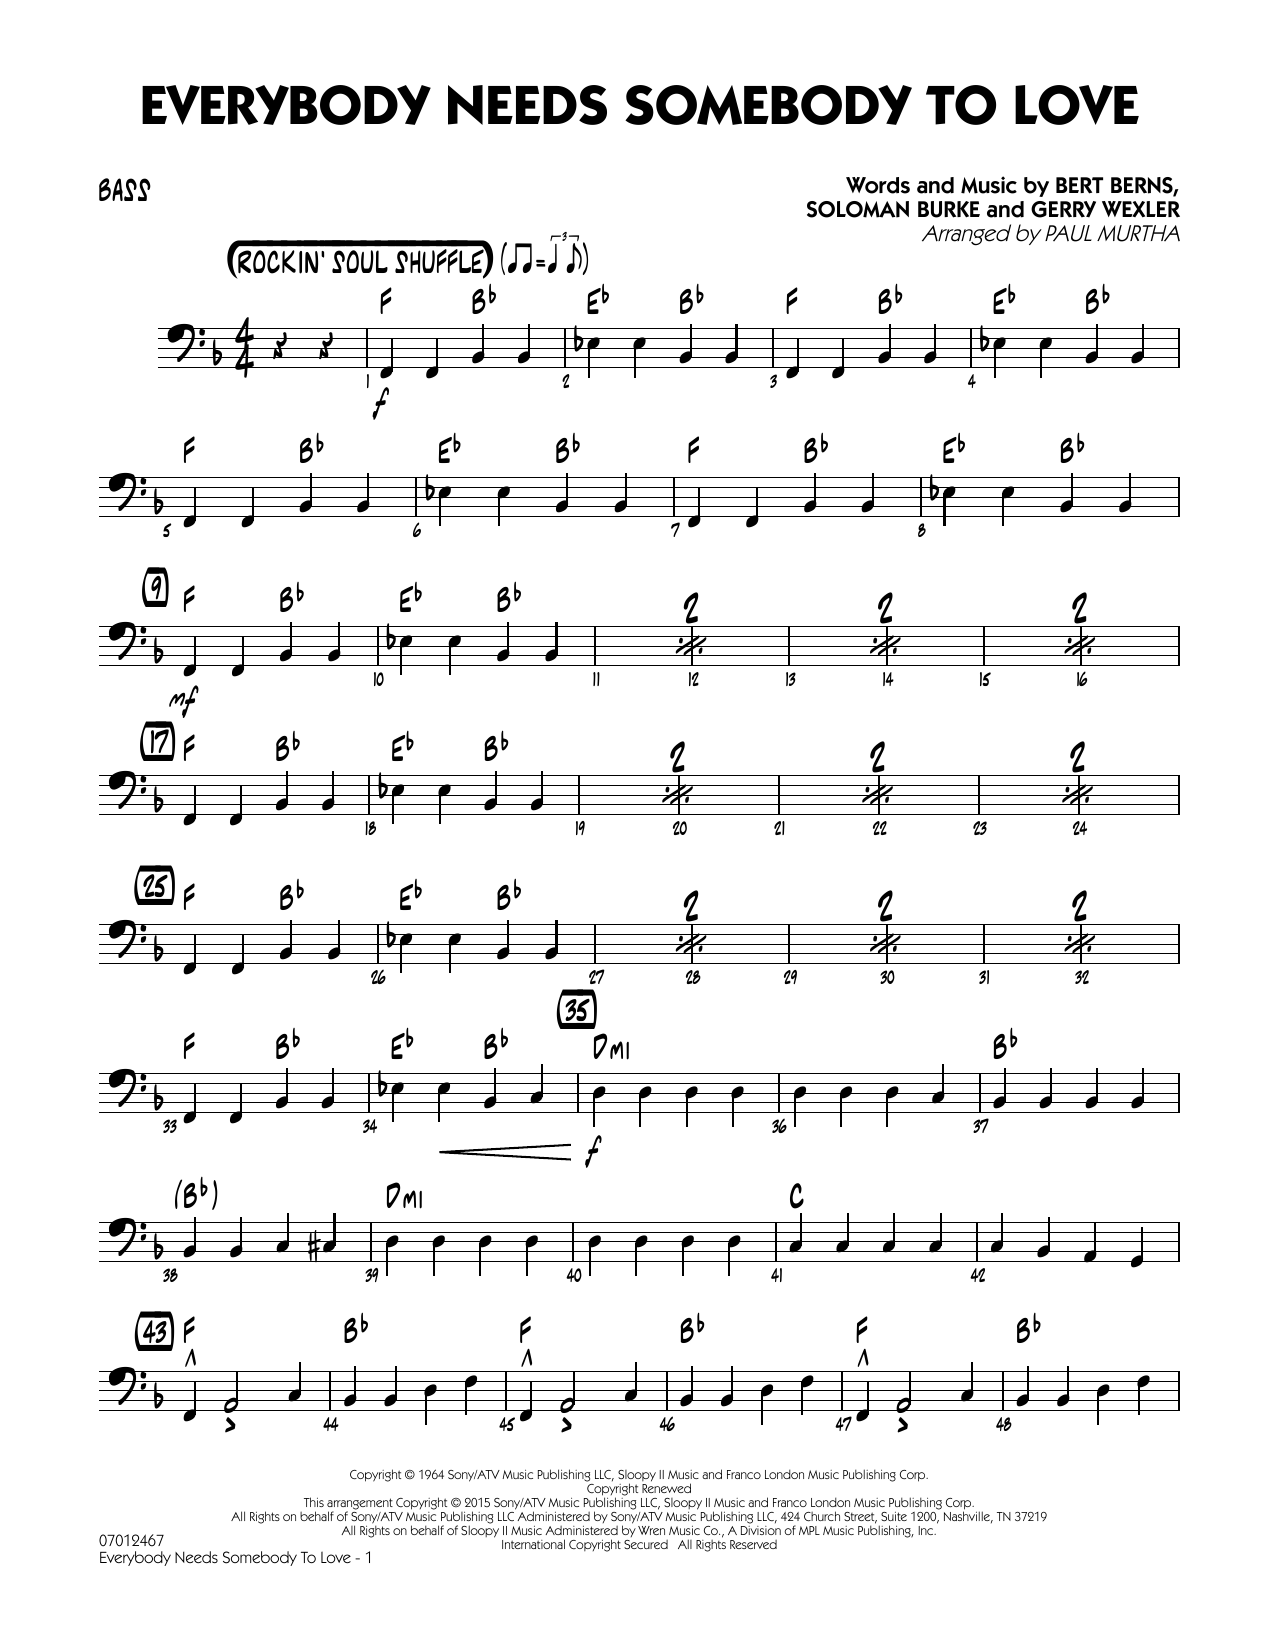 Paul Murtha Everybody Needs Somebody to Love - Bass sheet music notes and chords. Download Printable PDF.